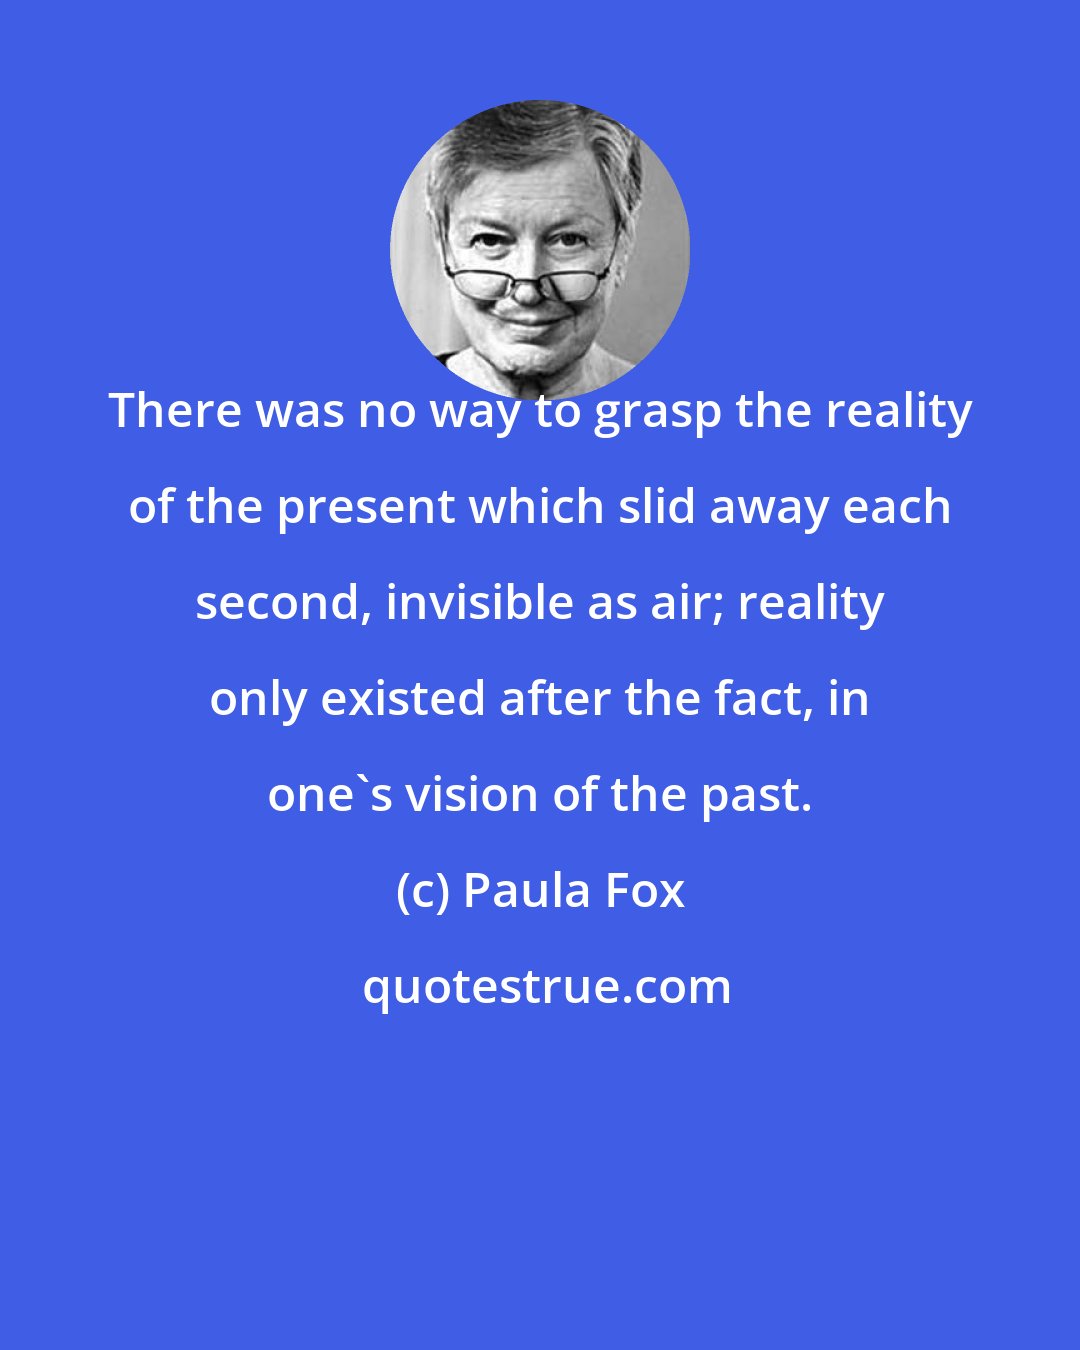 Paula Fox: There was no way to grasp the reality of the present which slid away each second, invisible as air; reality only existed after the fact, in one's vision of the past.